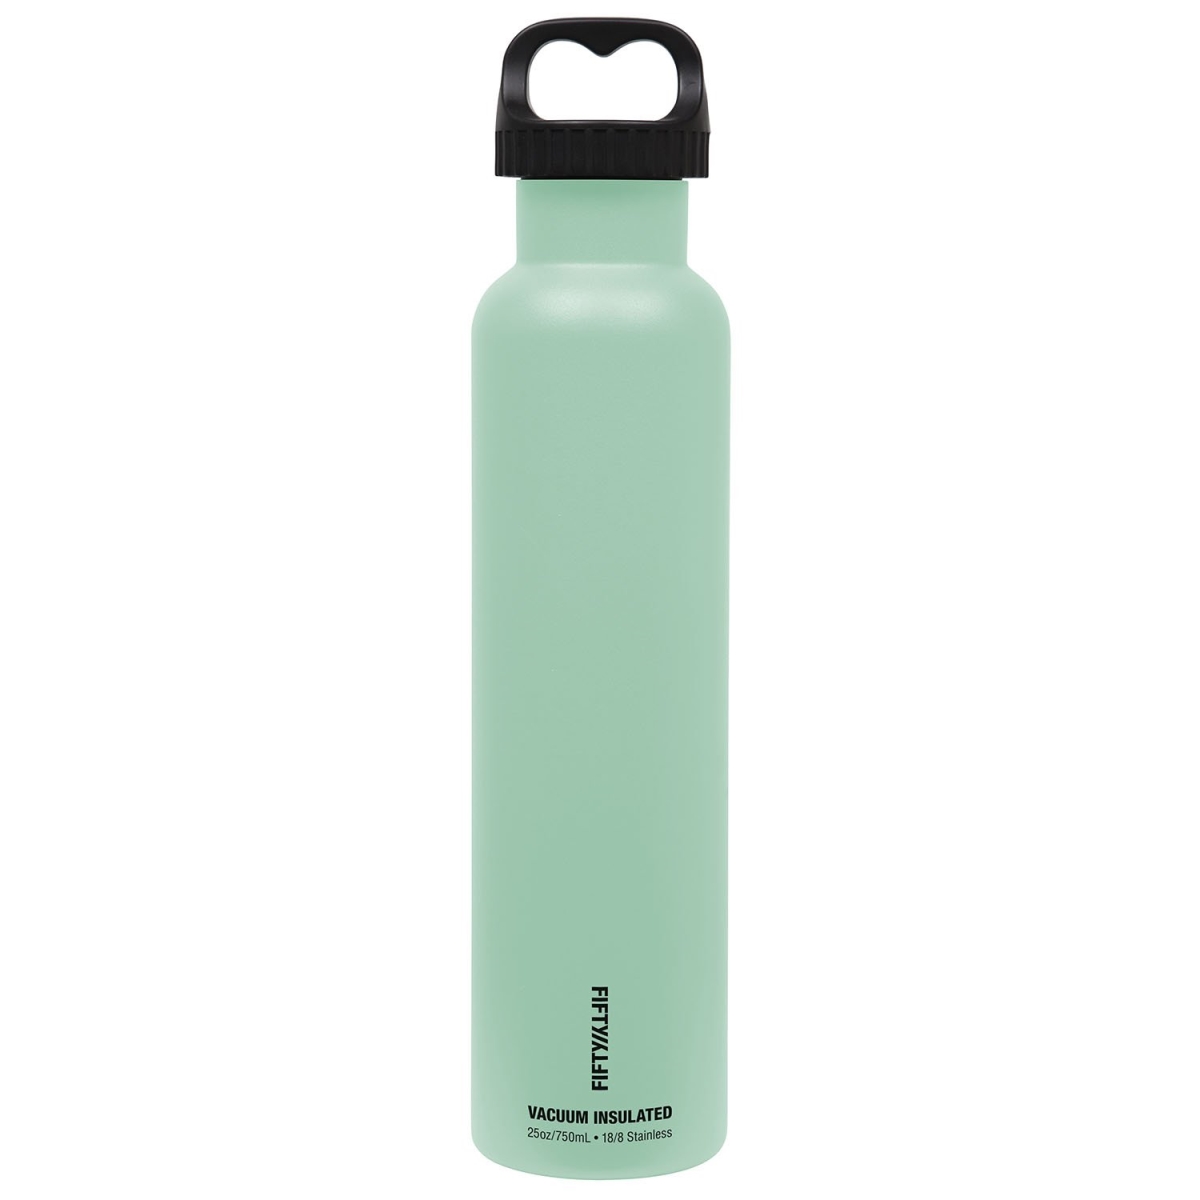 V25003mn0 25 Oz Double-wall Vacuum-insulated Bottles With 2 Finger Grip Cap, Cool Mint